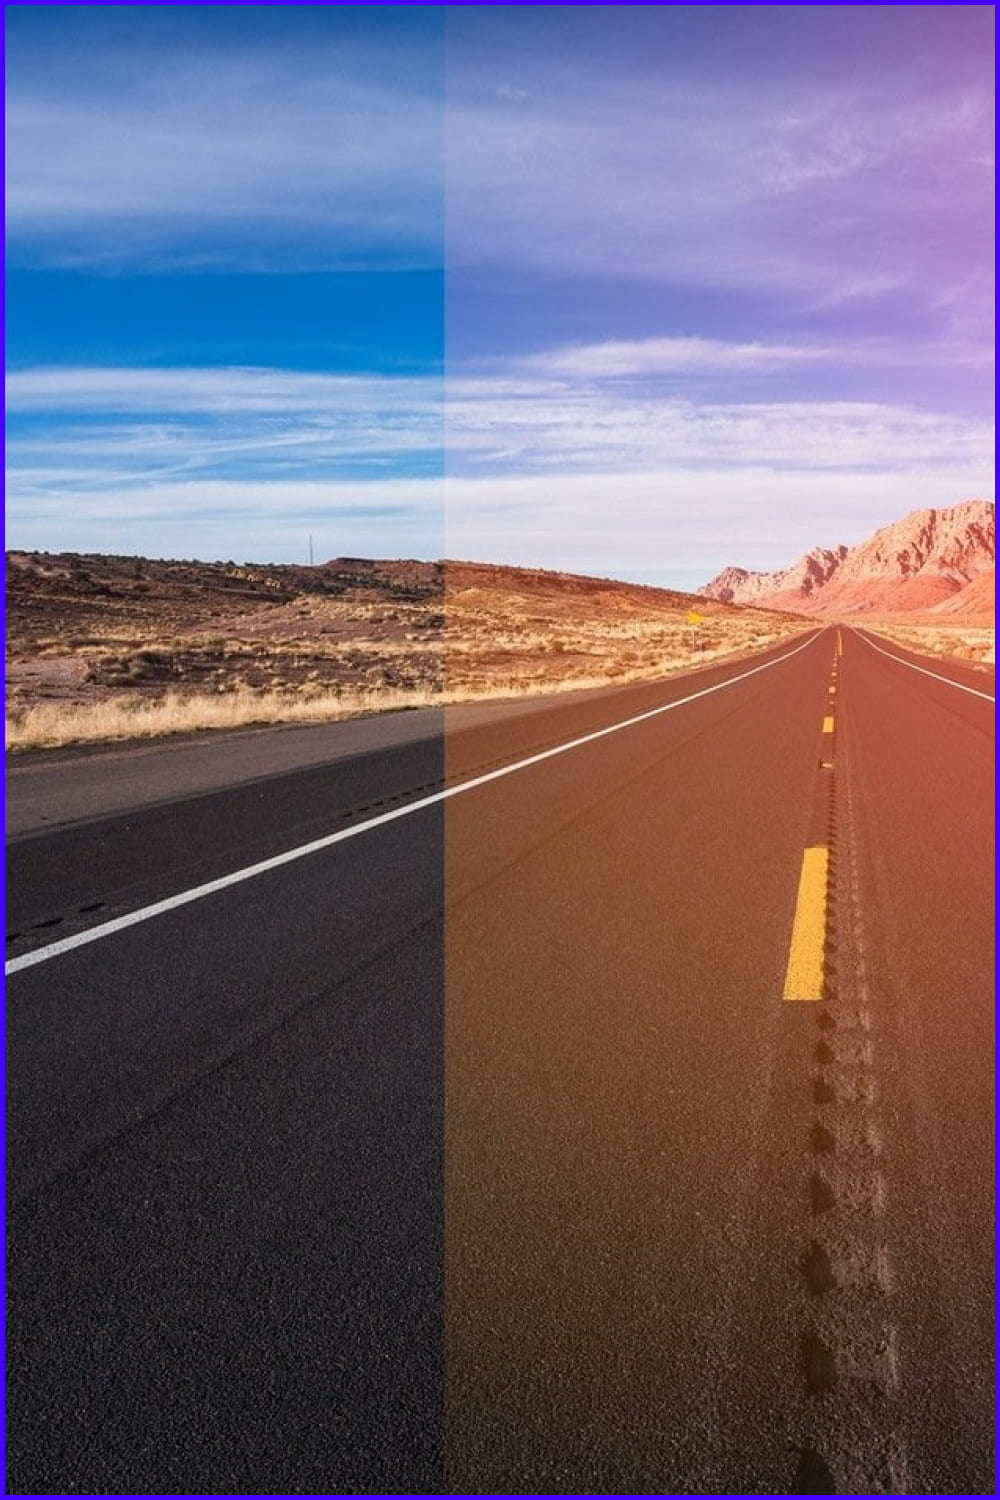 Photo of a road in two parts in different color shades.